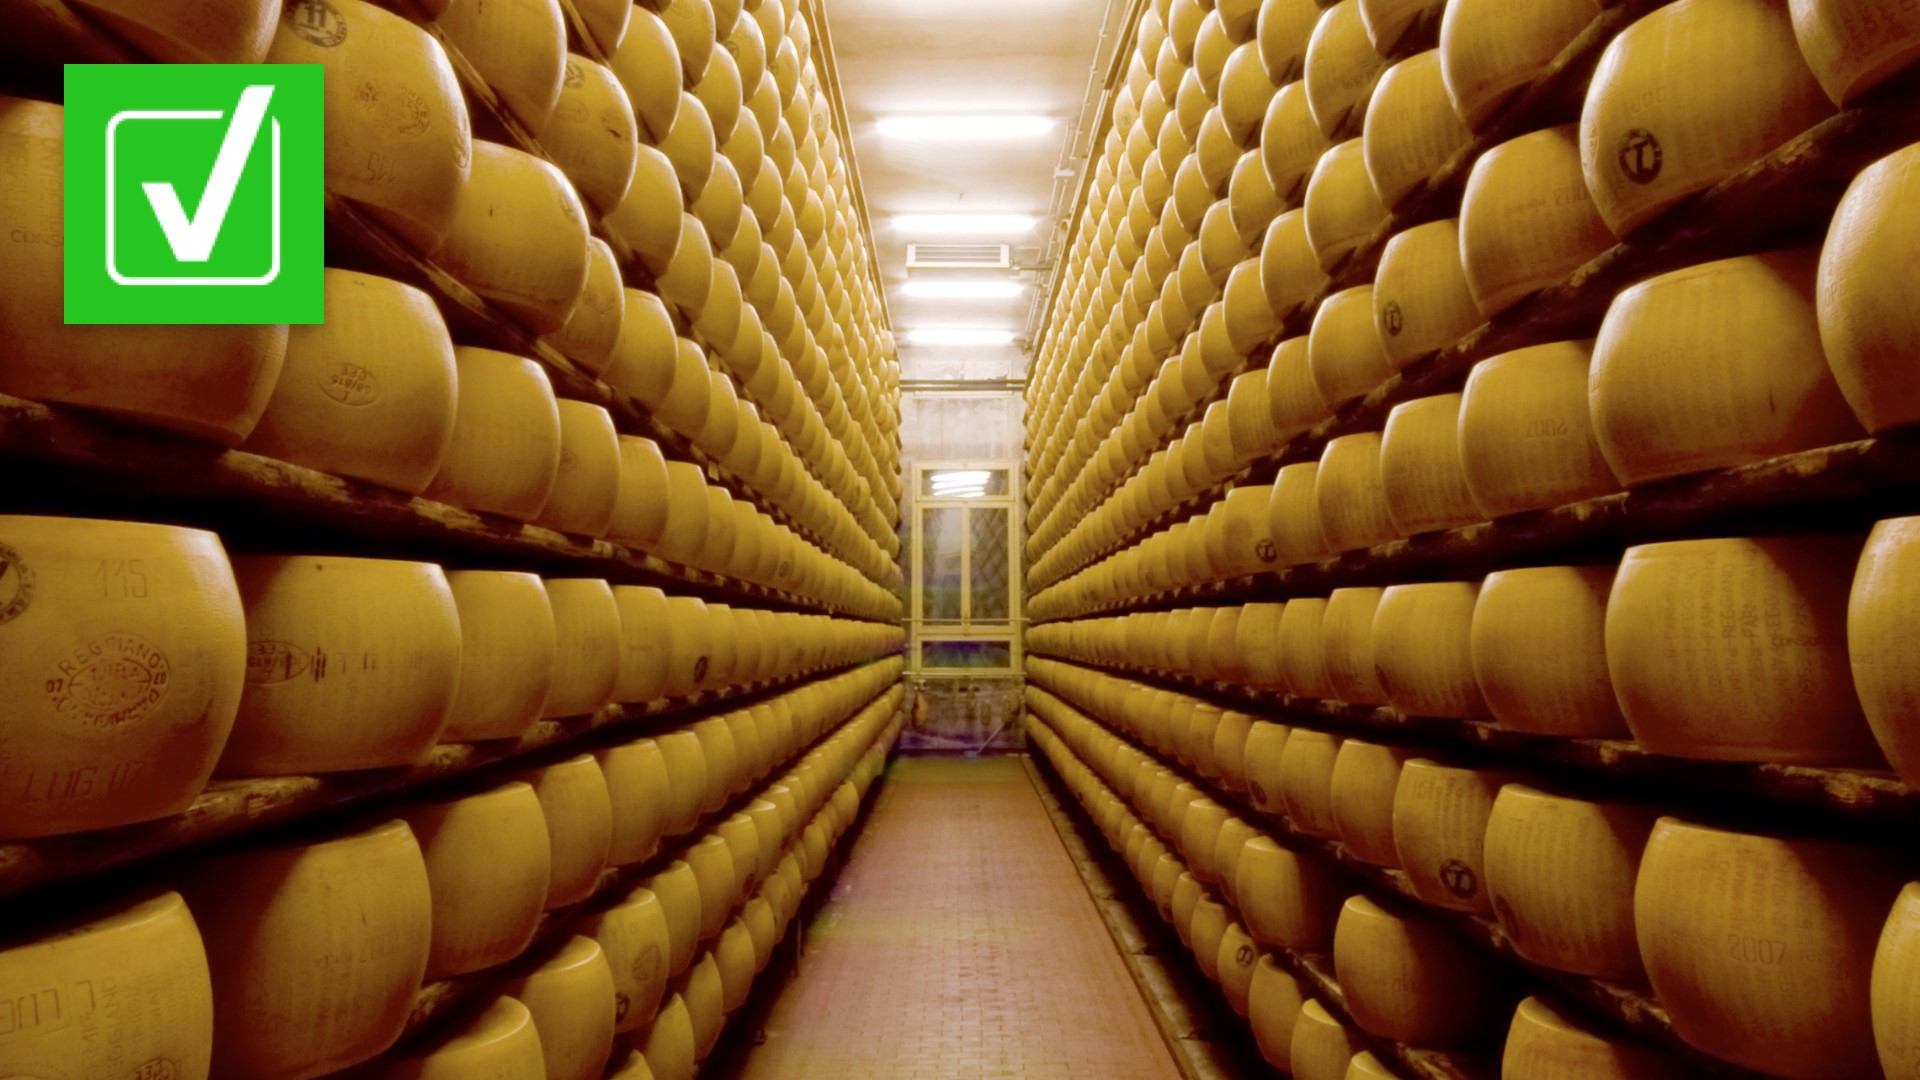 A viral social media post claims the government is stockpiling billions of pounds of cheese. The tweet needs some context.